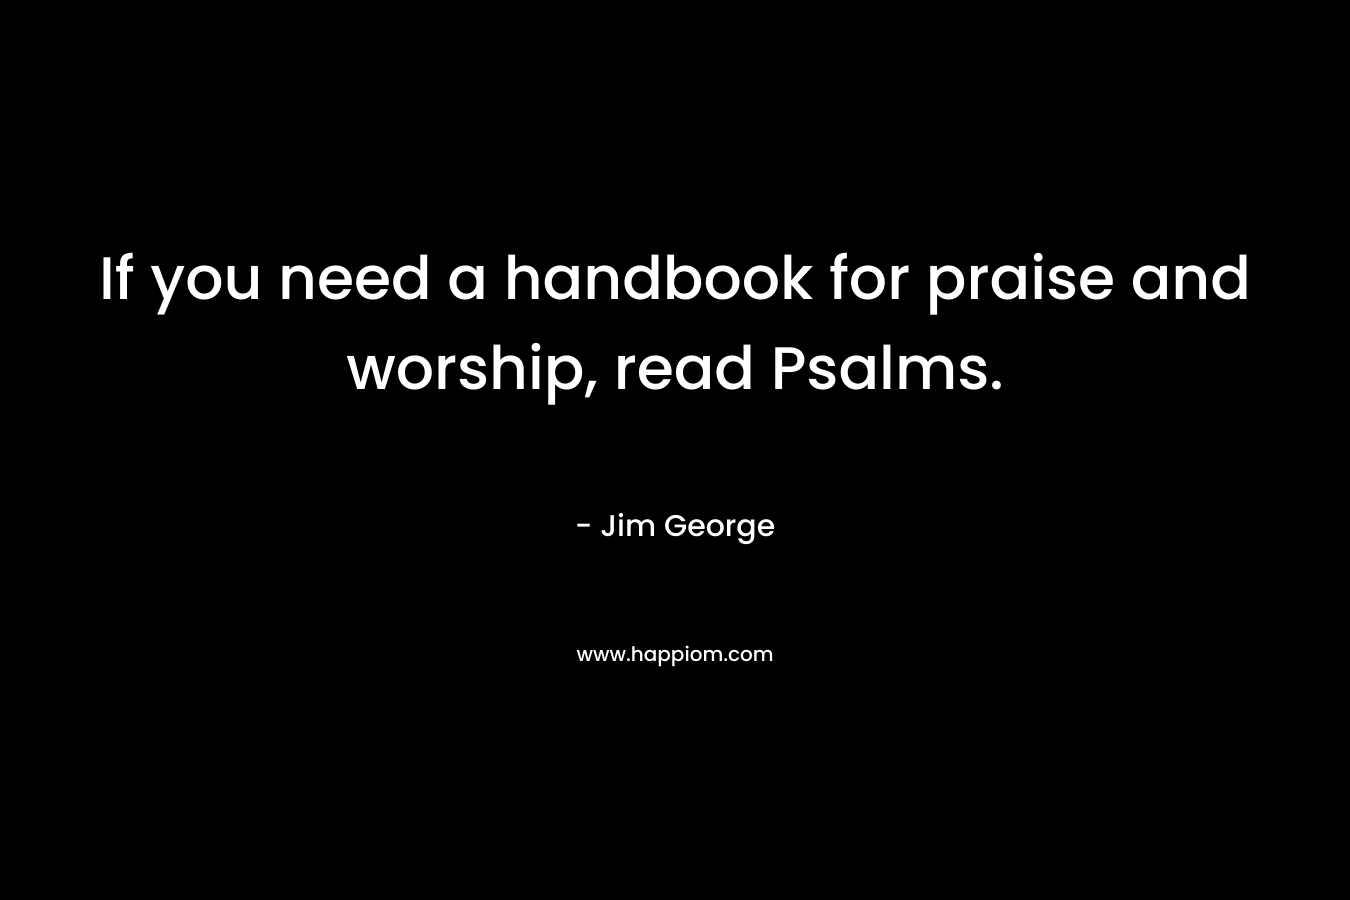 If you need a handbook for praise and worship, read Psalms. – Jim George